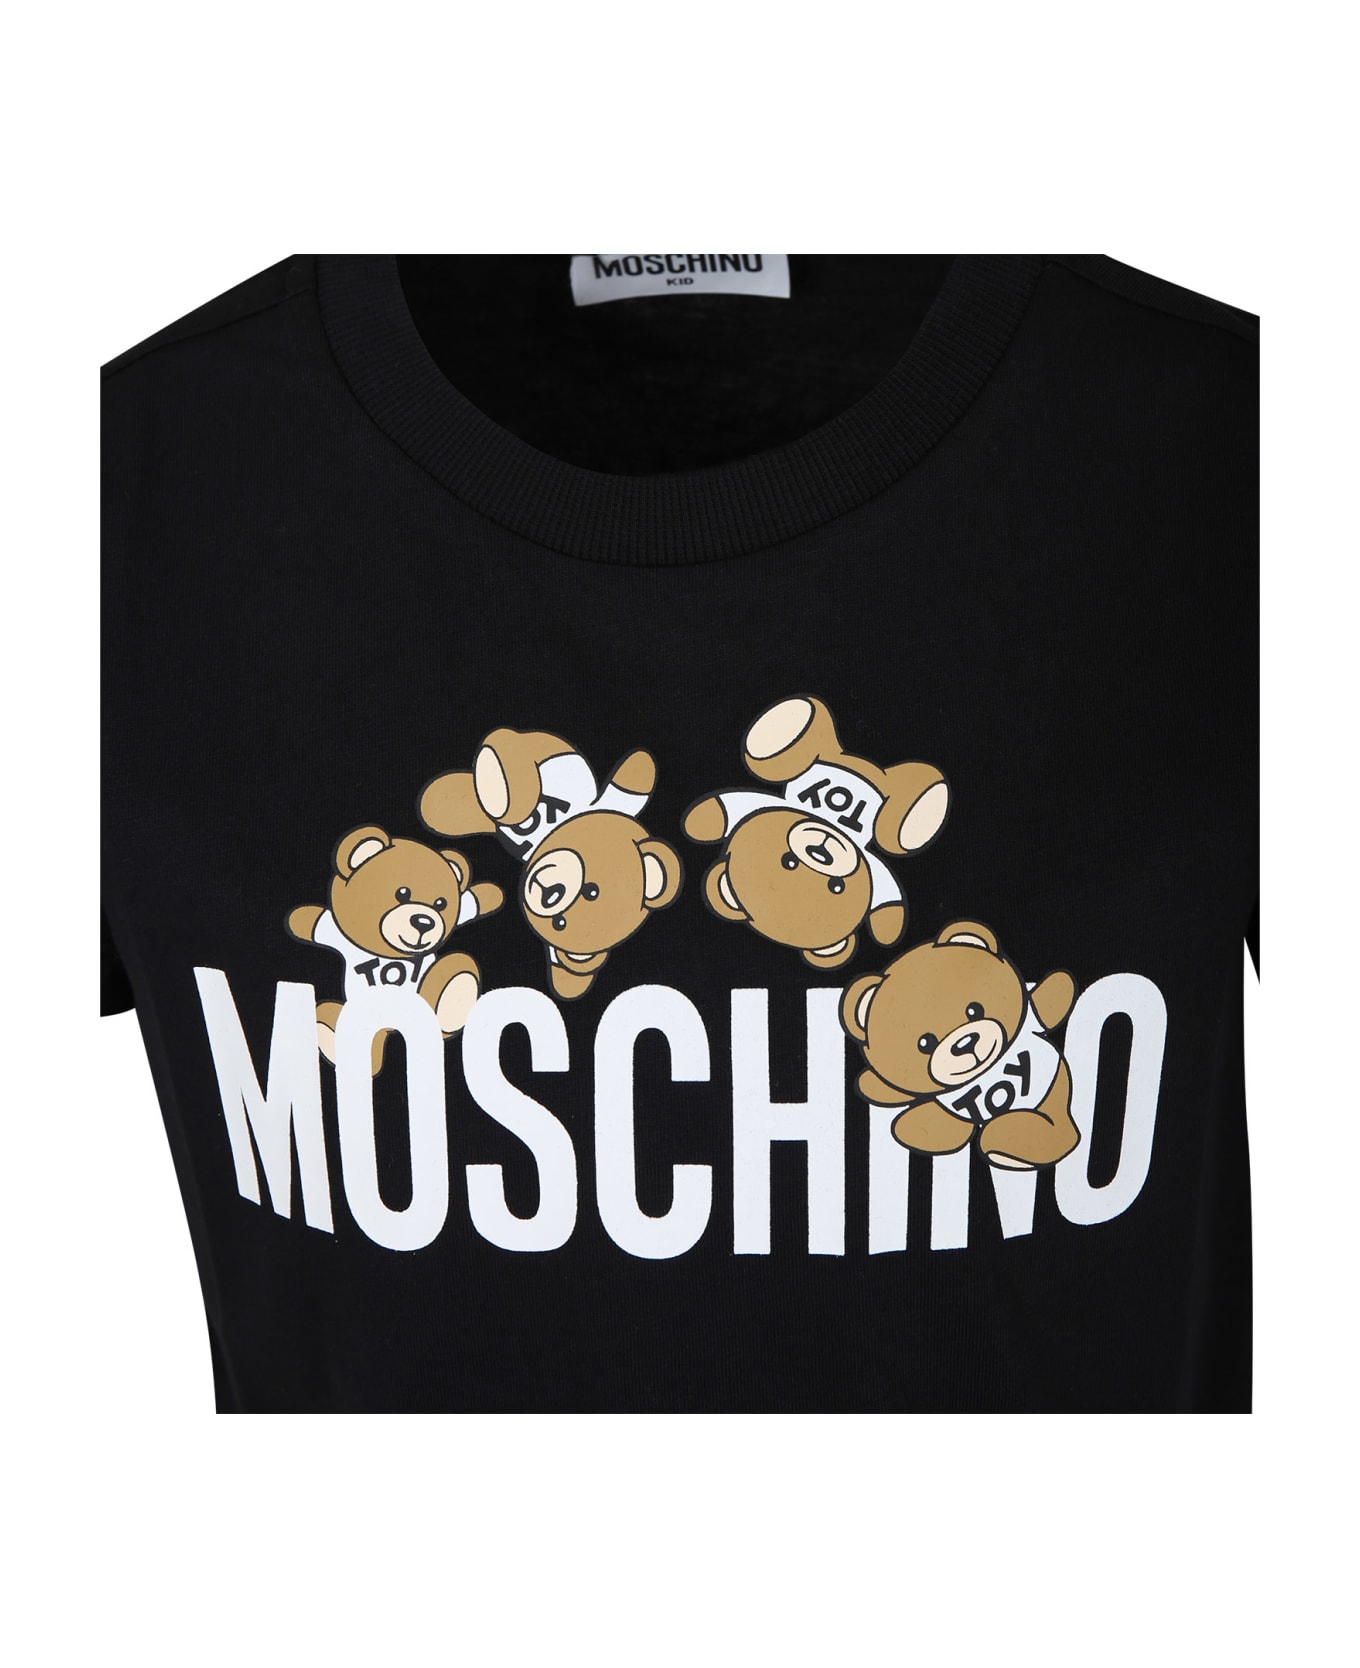 Moschino Black T-shirt For Kids With Logo And Teddy Bear - Black